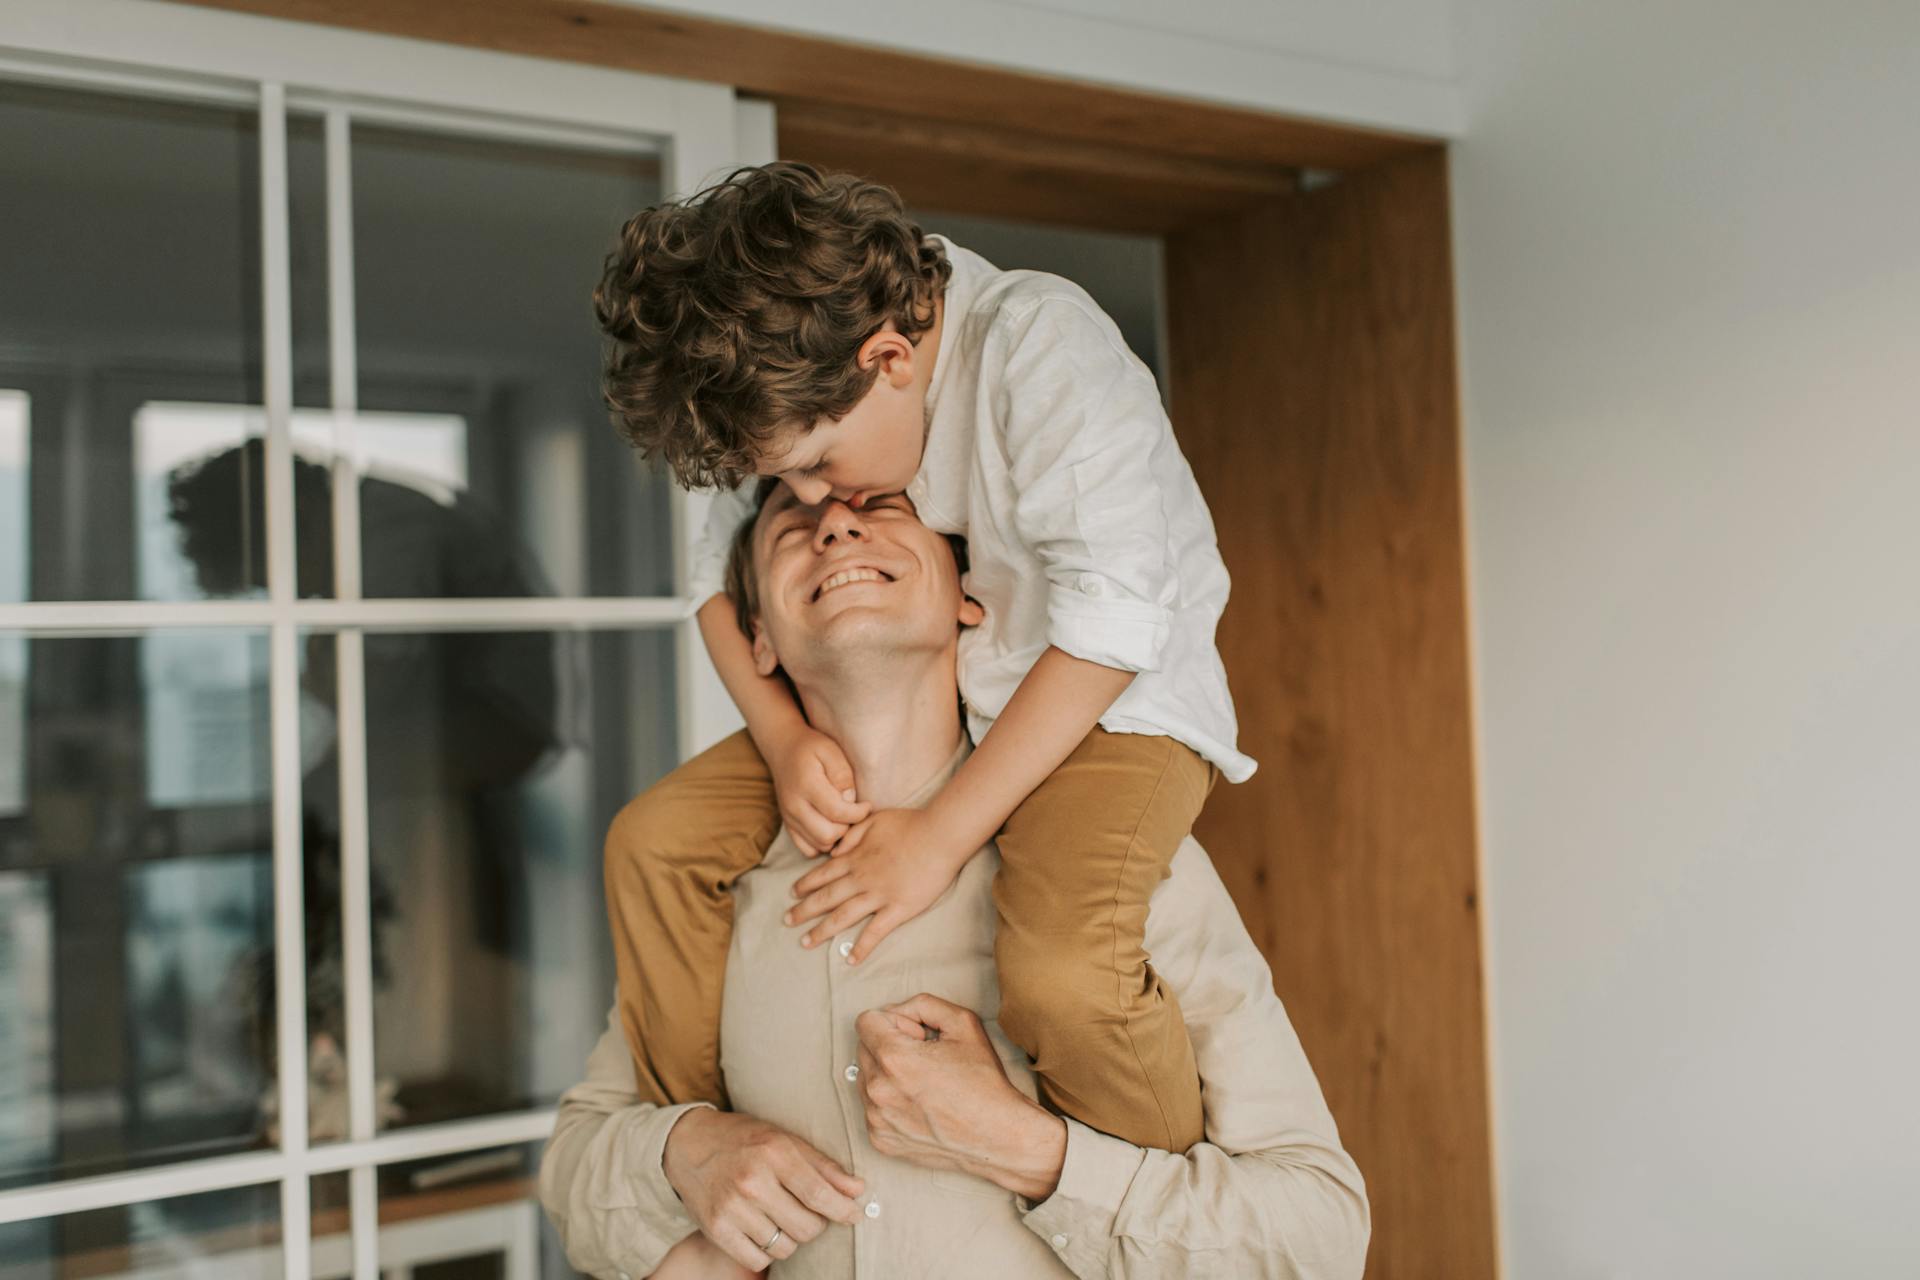 A man carrying his son on his shoulders | Source: Pexels